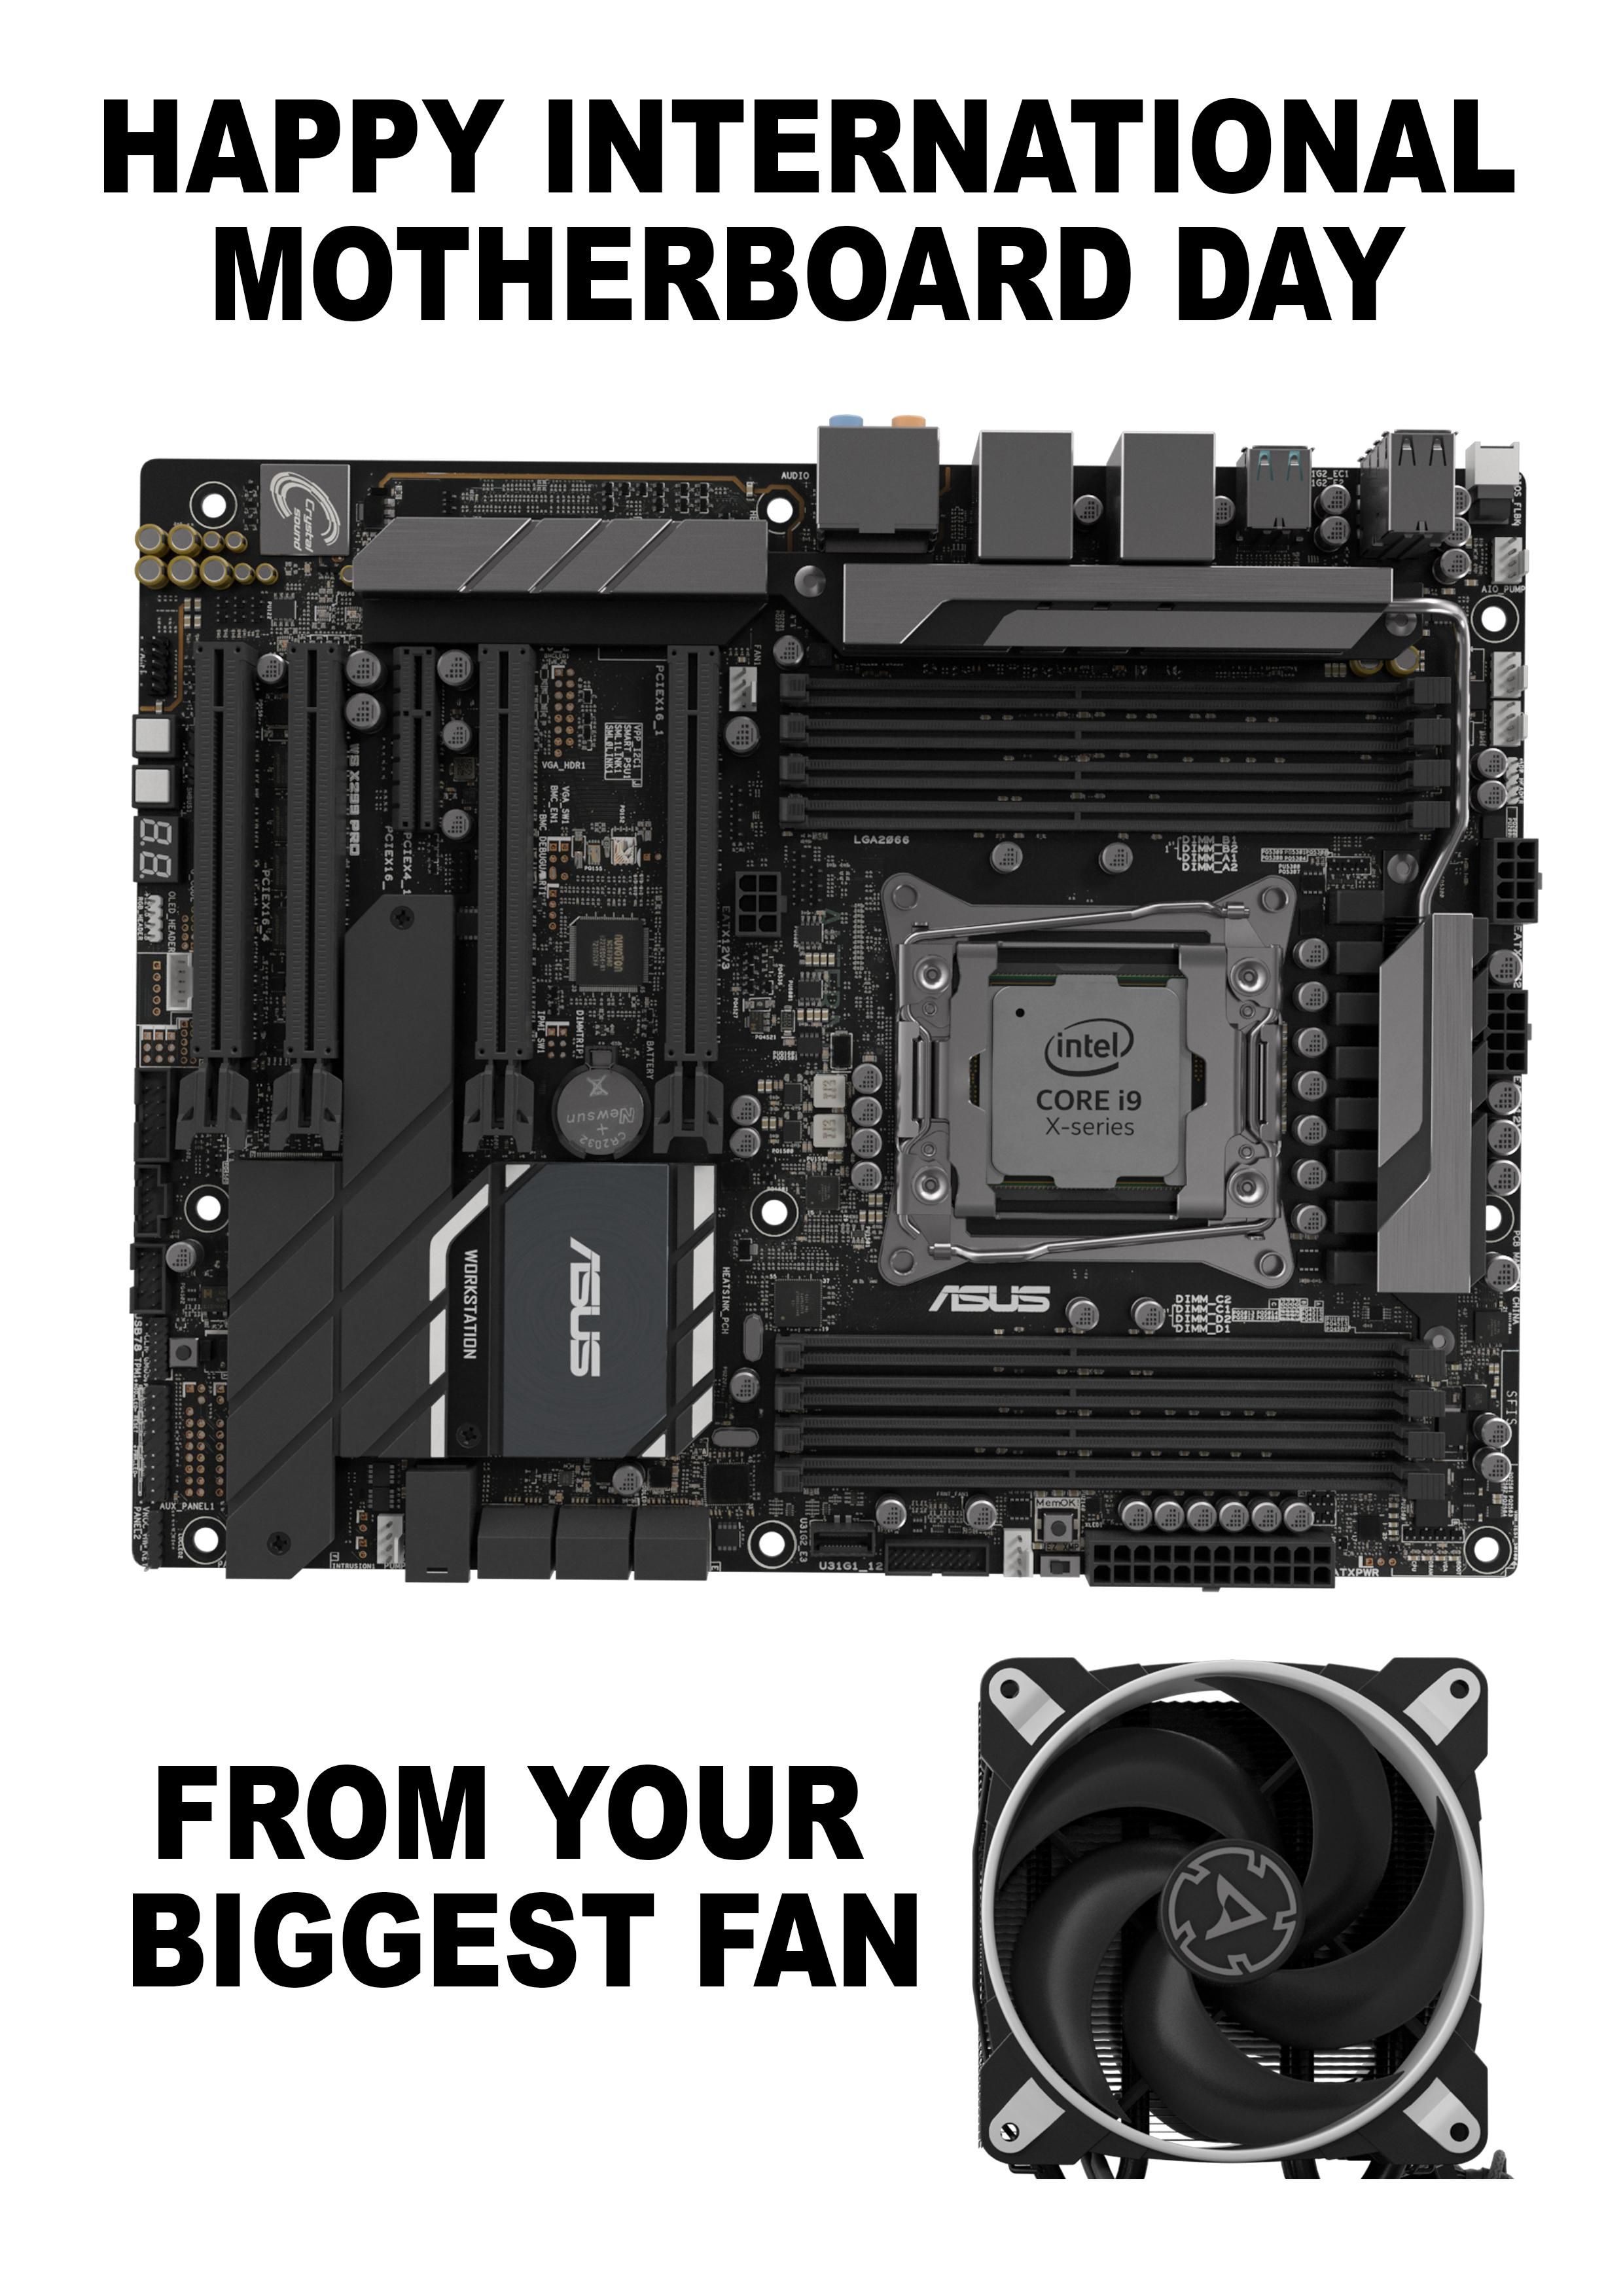 So grateful to all the motherboards out there.